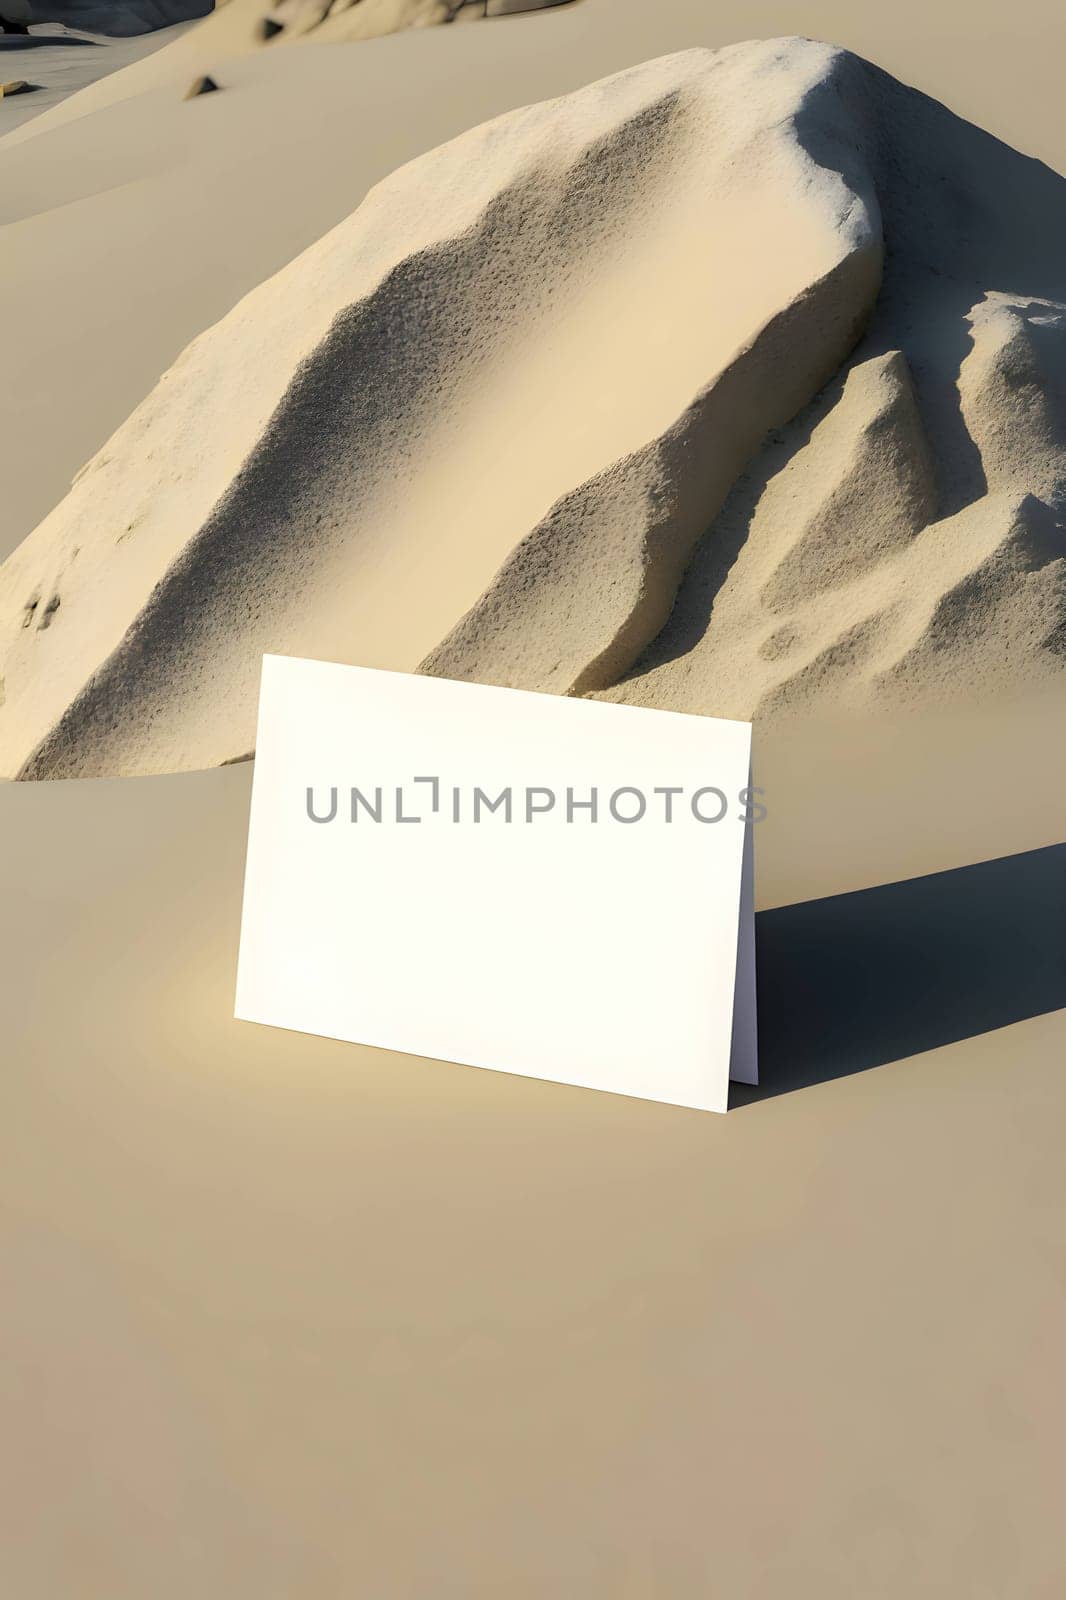 A blank white card stands out against a desert background, ready to be filled with your message or design.